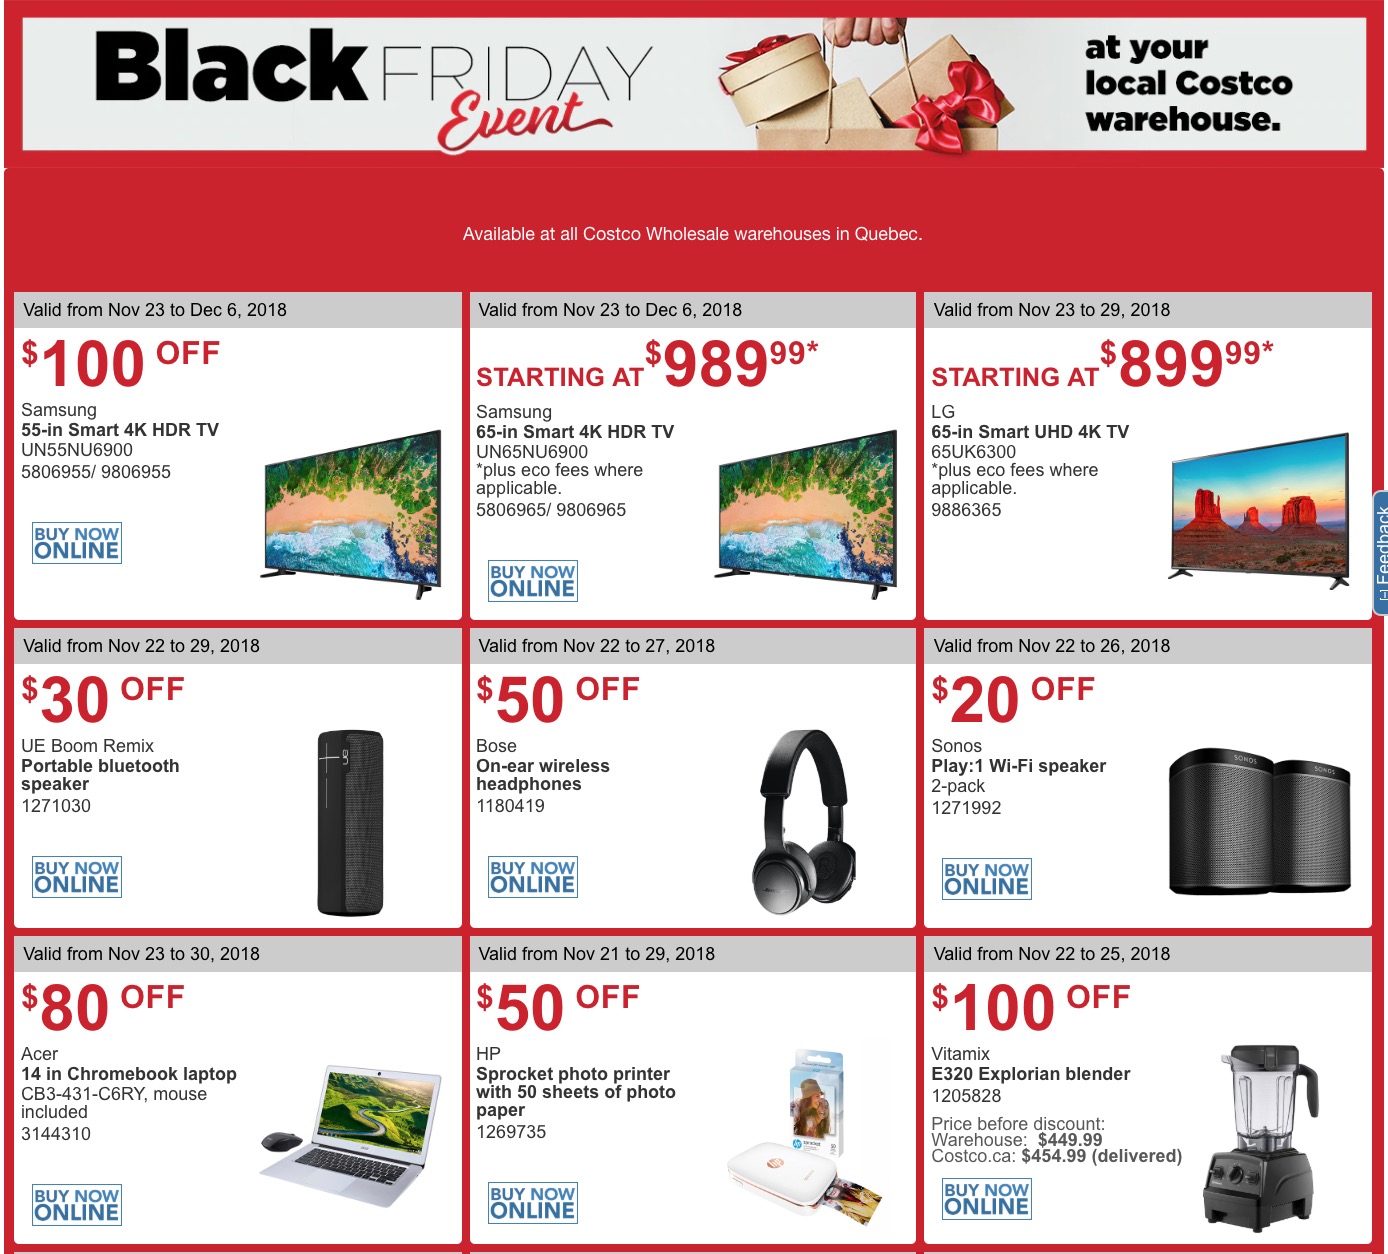 Costco Canada Black Friday 2018 *LIVE* Coupons/Flyers for Quebec, November 23 - 25 - Hot Canada ...